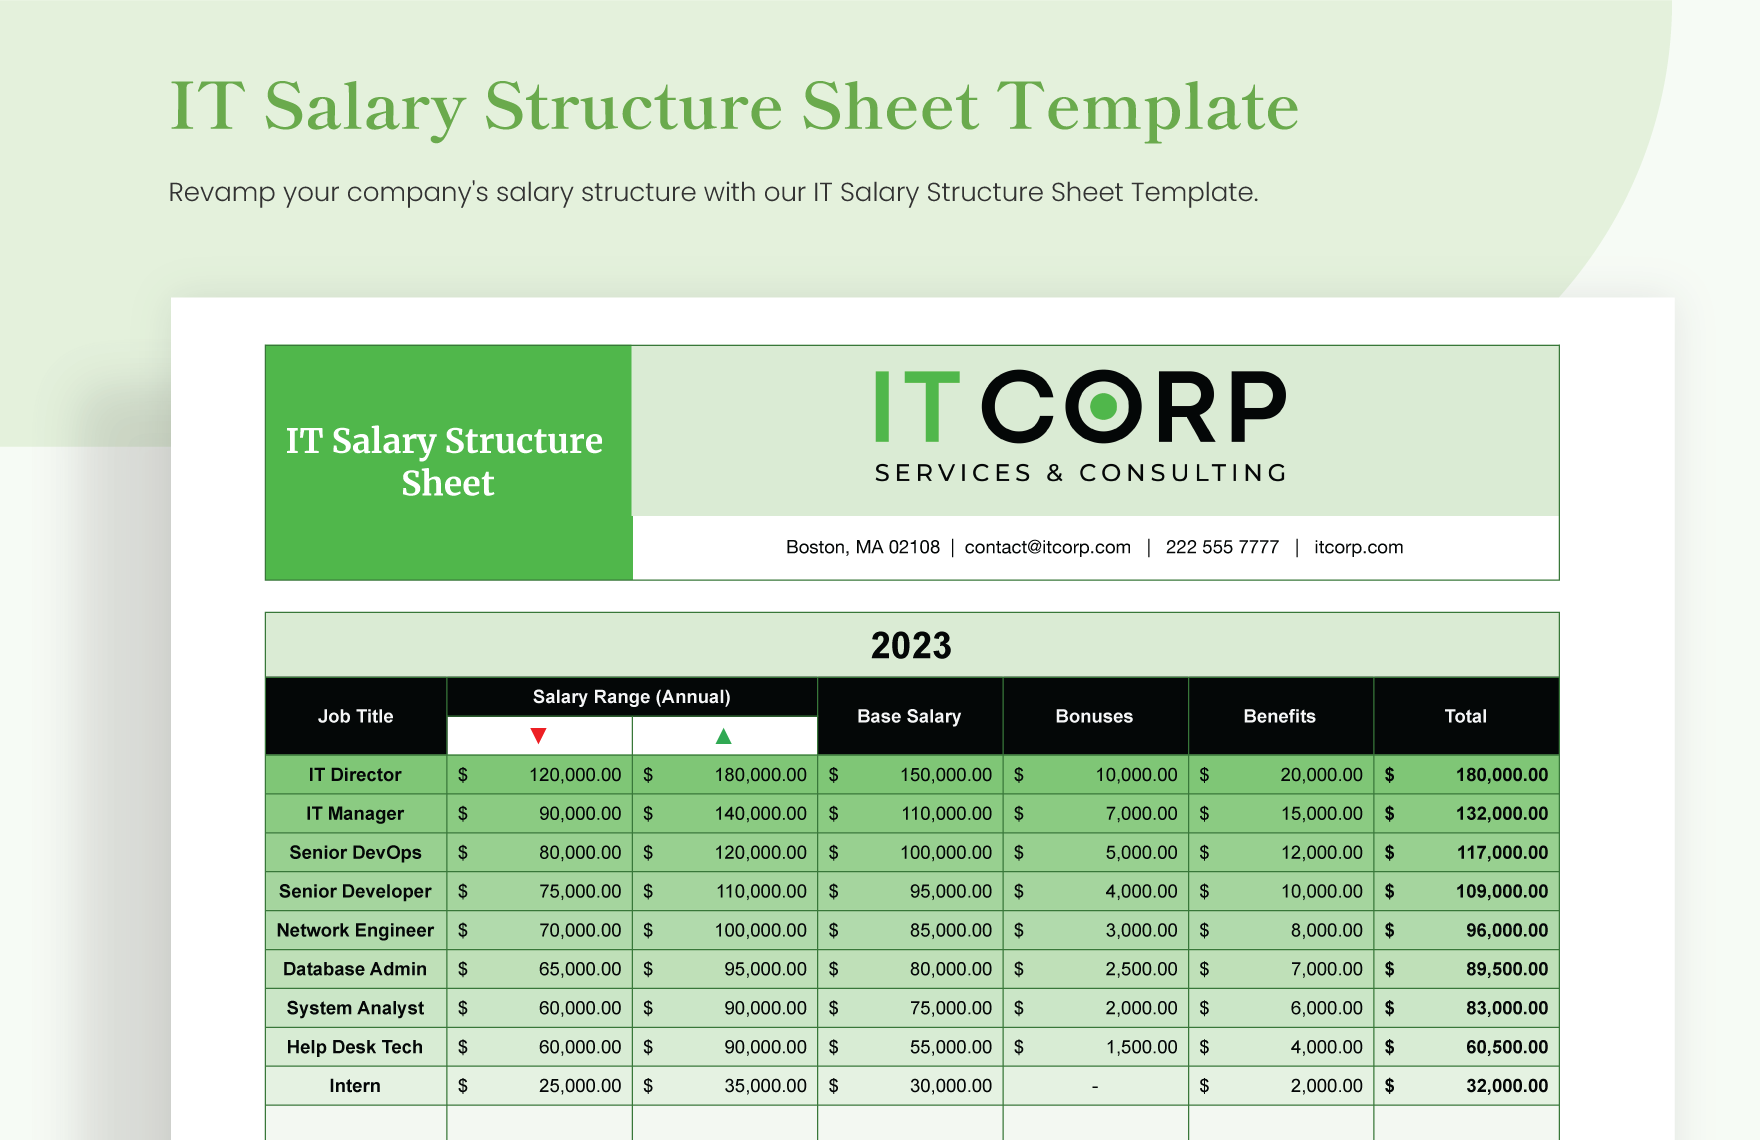 IT Salary Structure Sheet Template